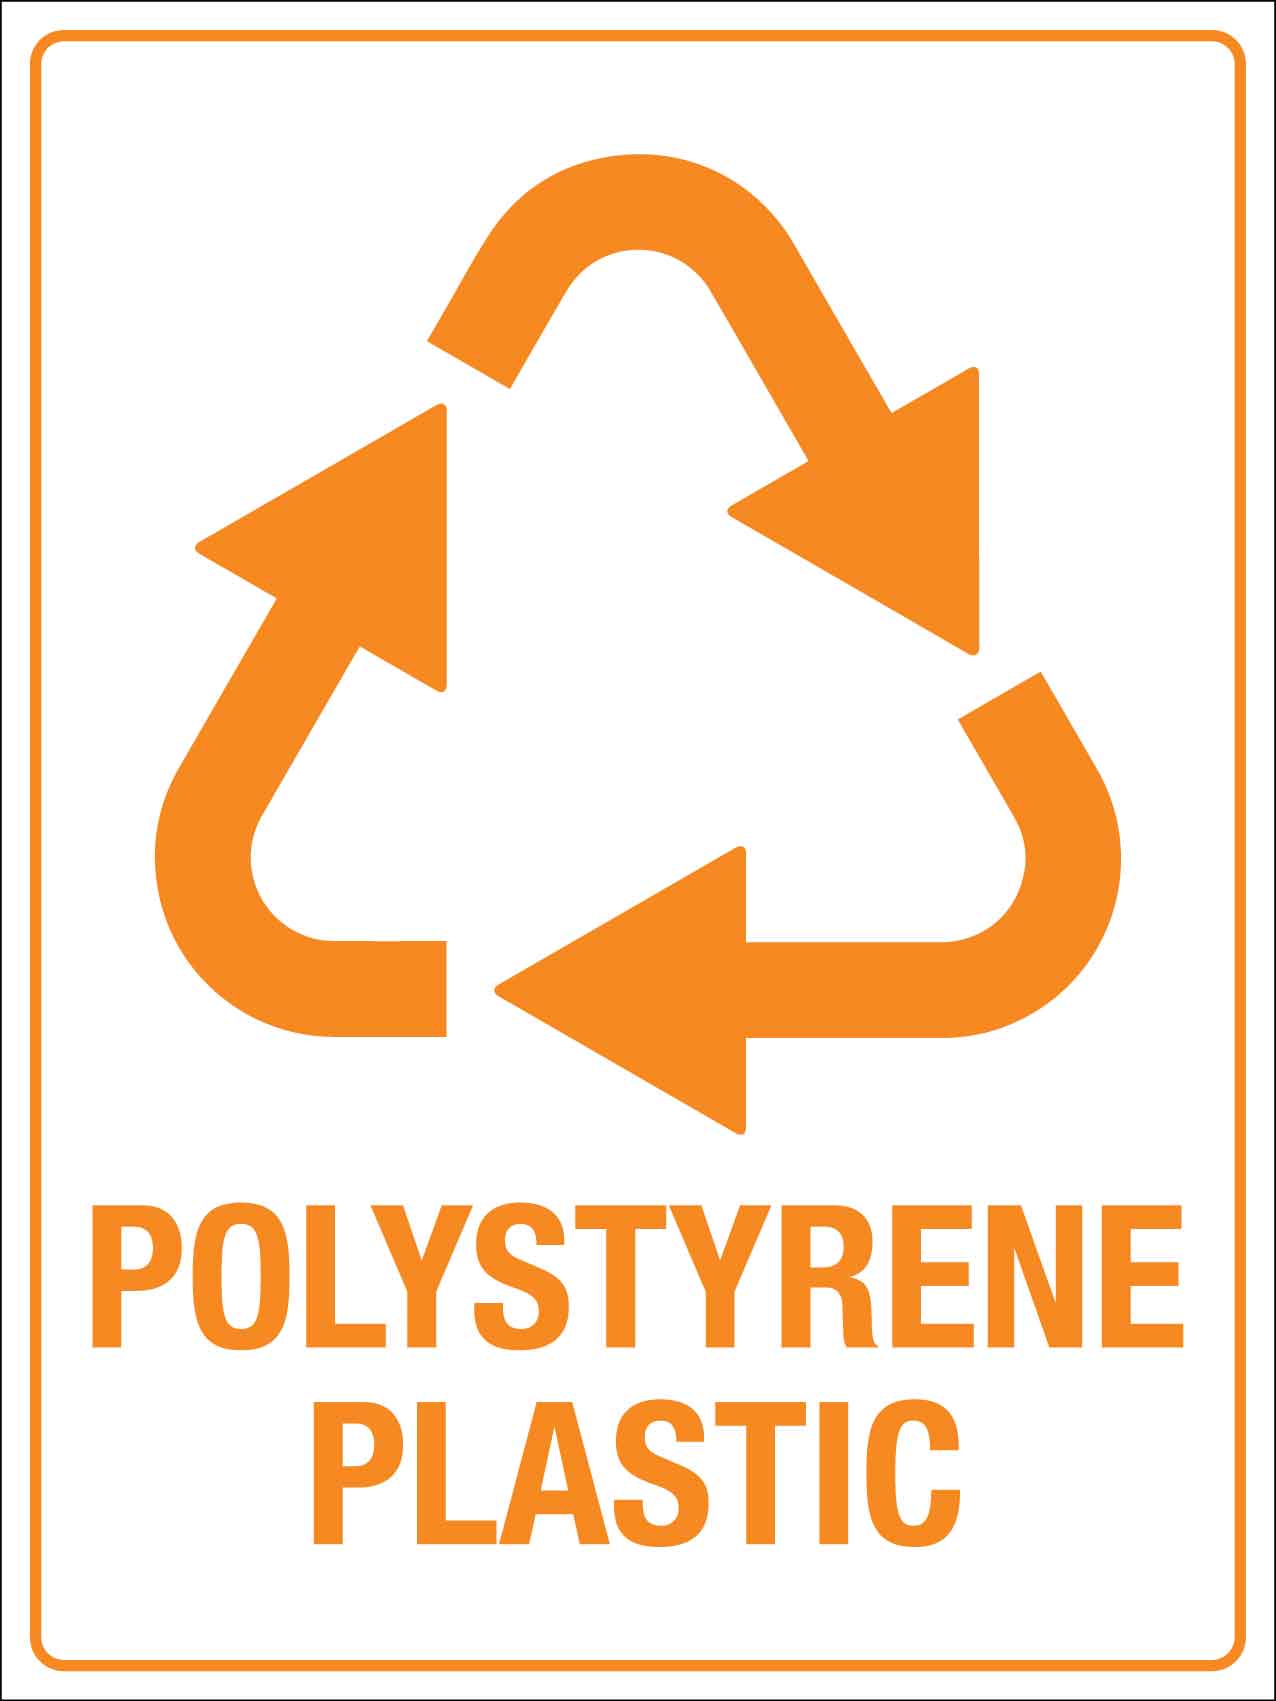 Polystyrene Plastic Recycling Sign